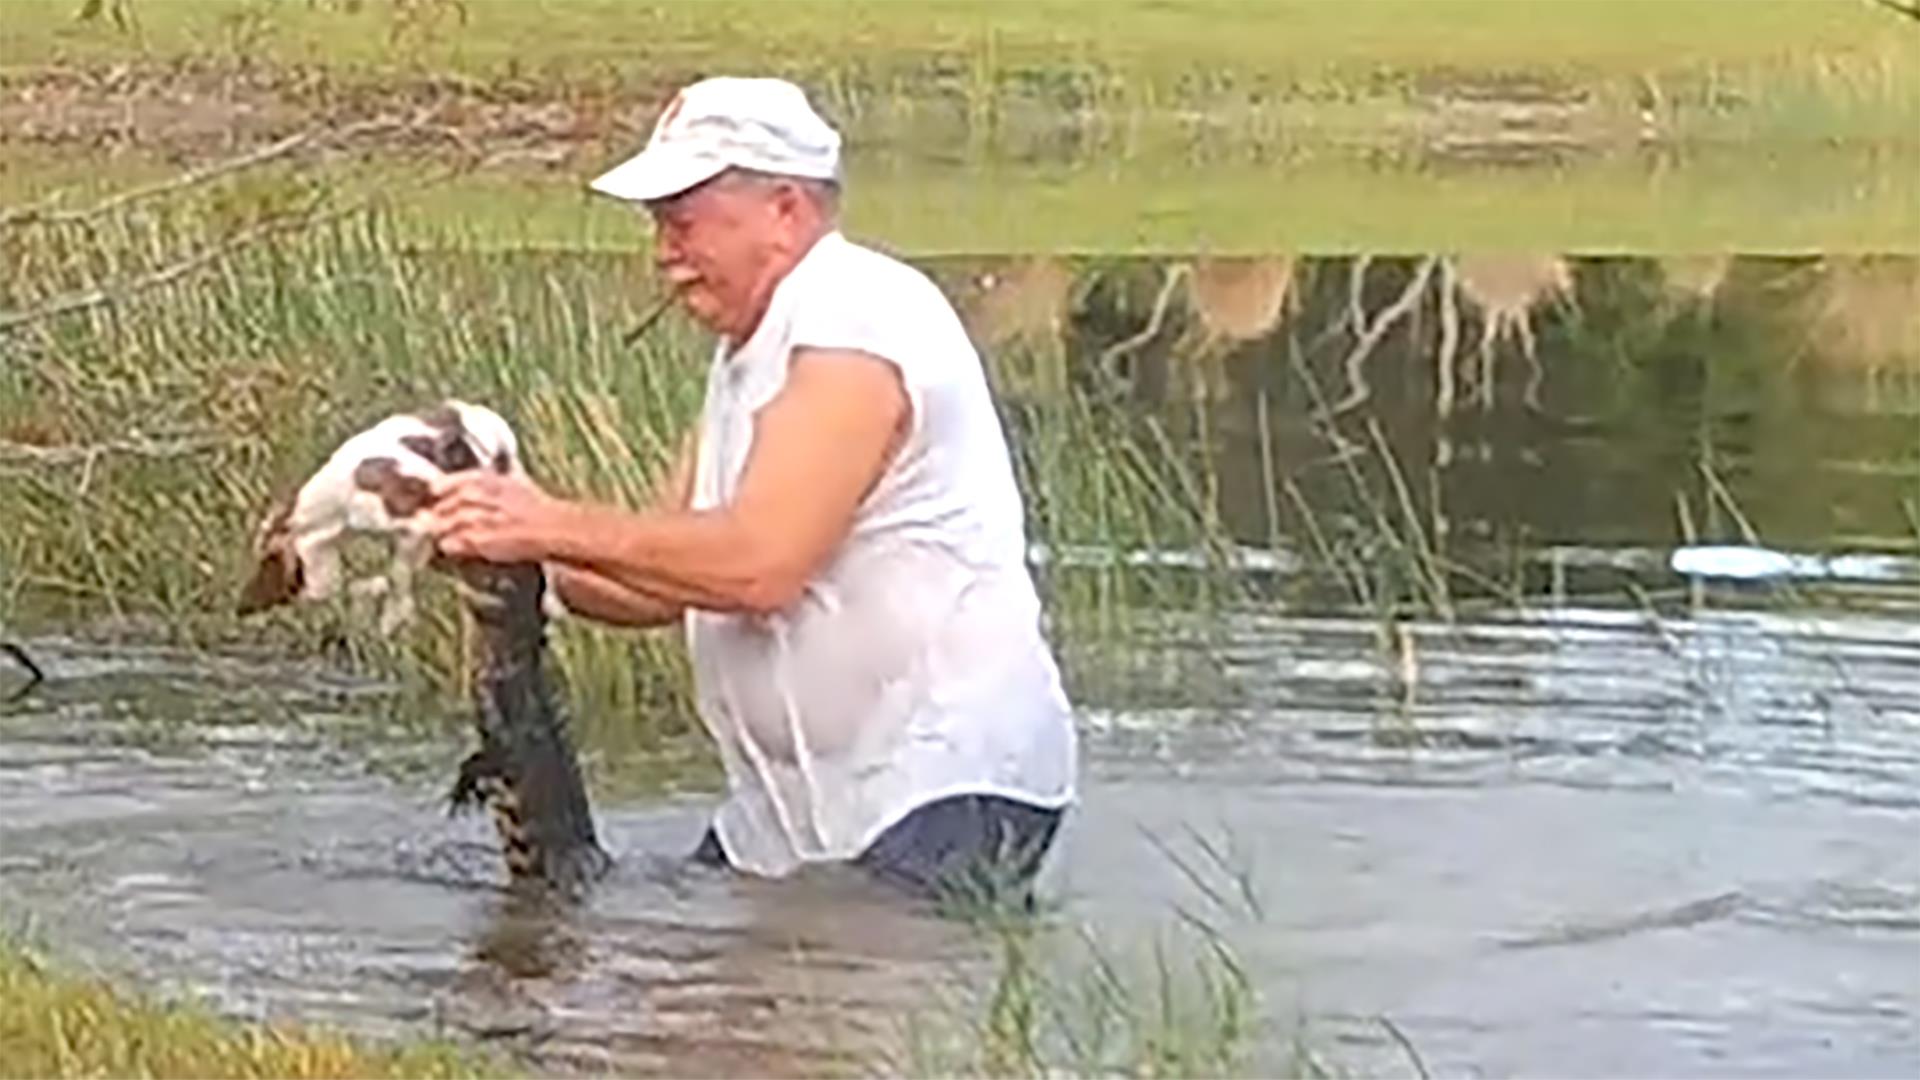 WATCH: Man pulls puppy from jaws of alligator after rescuing it in pond